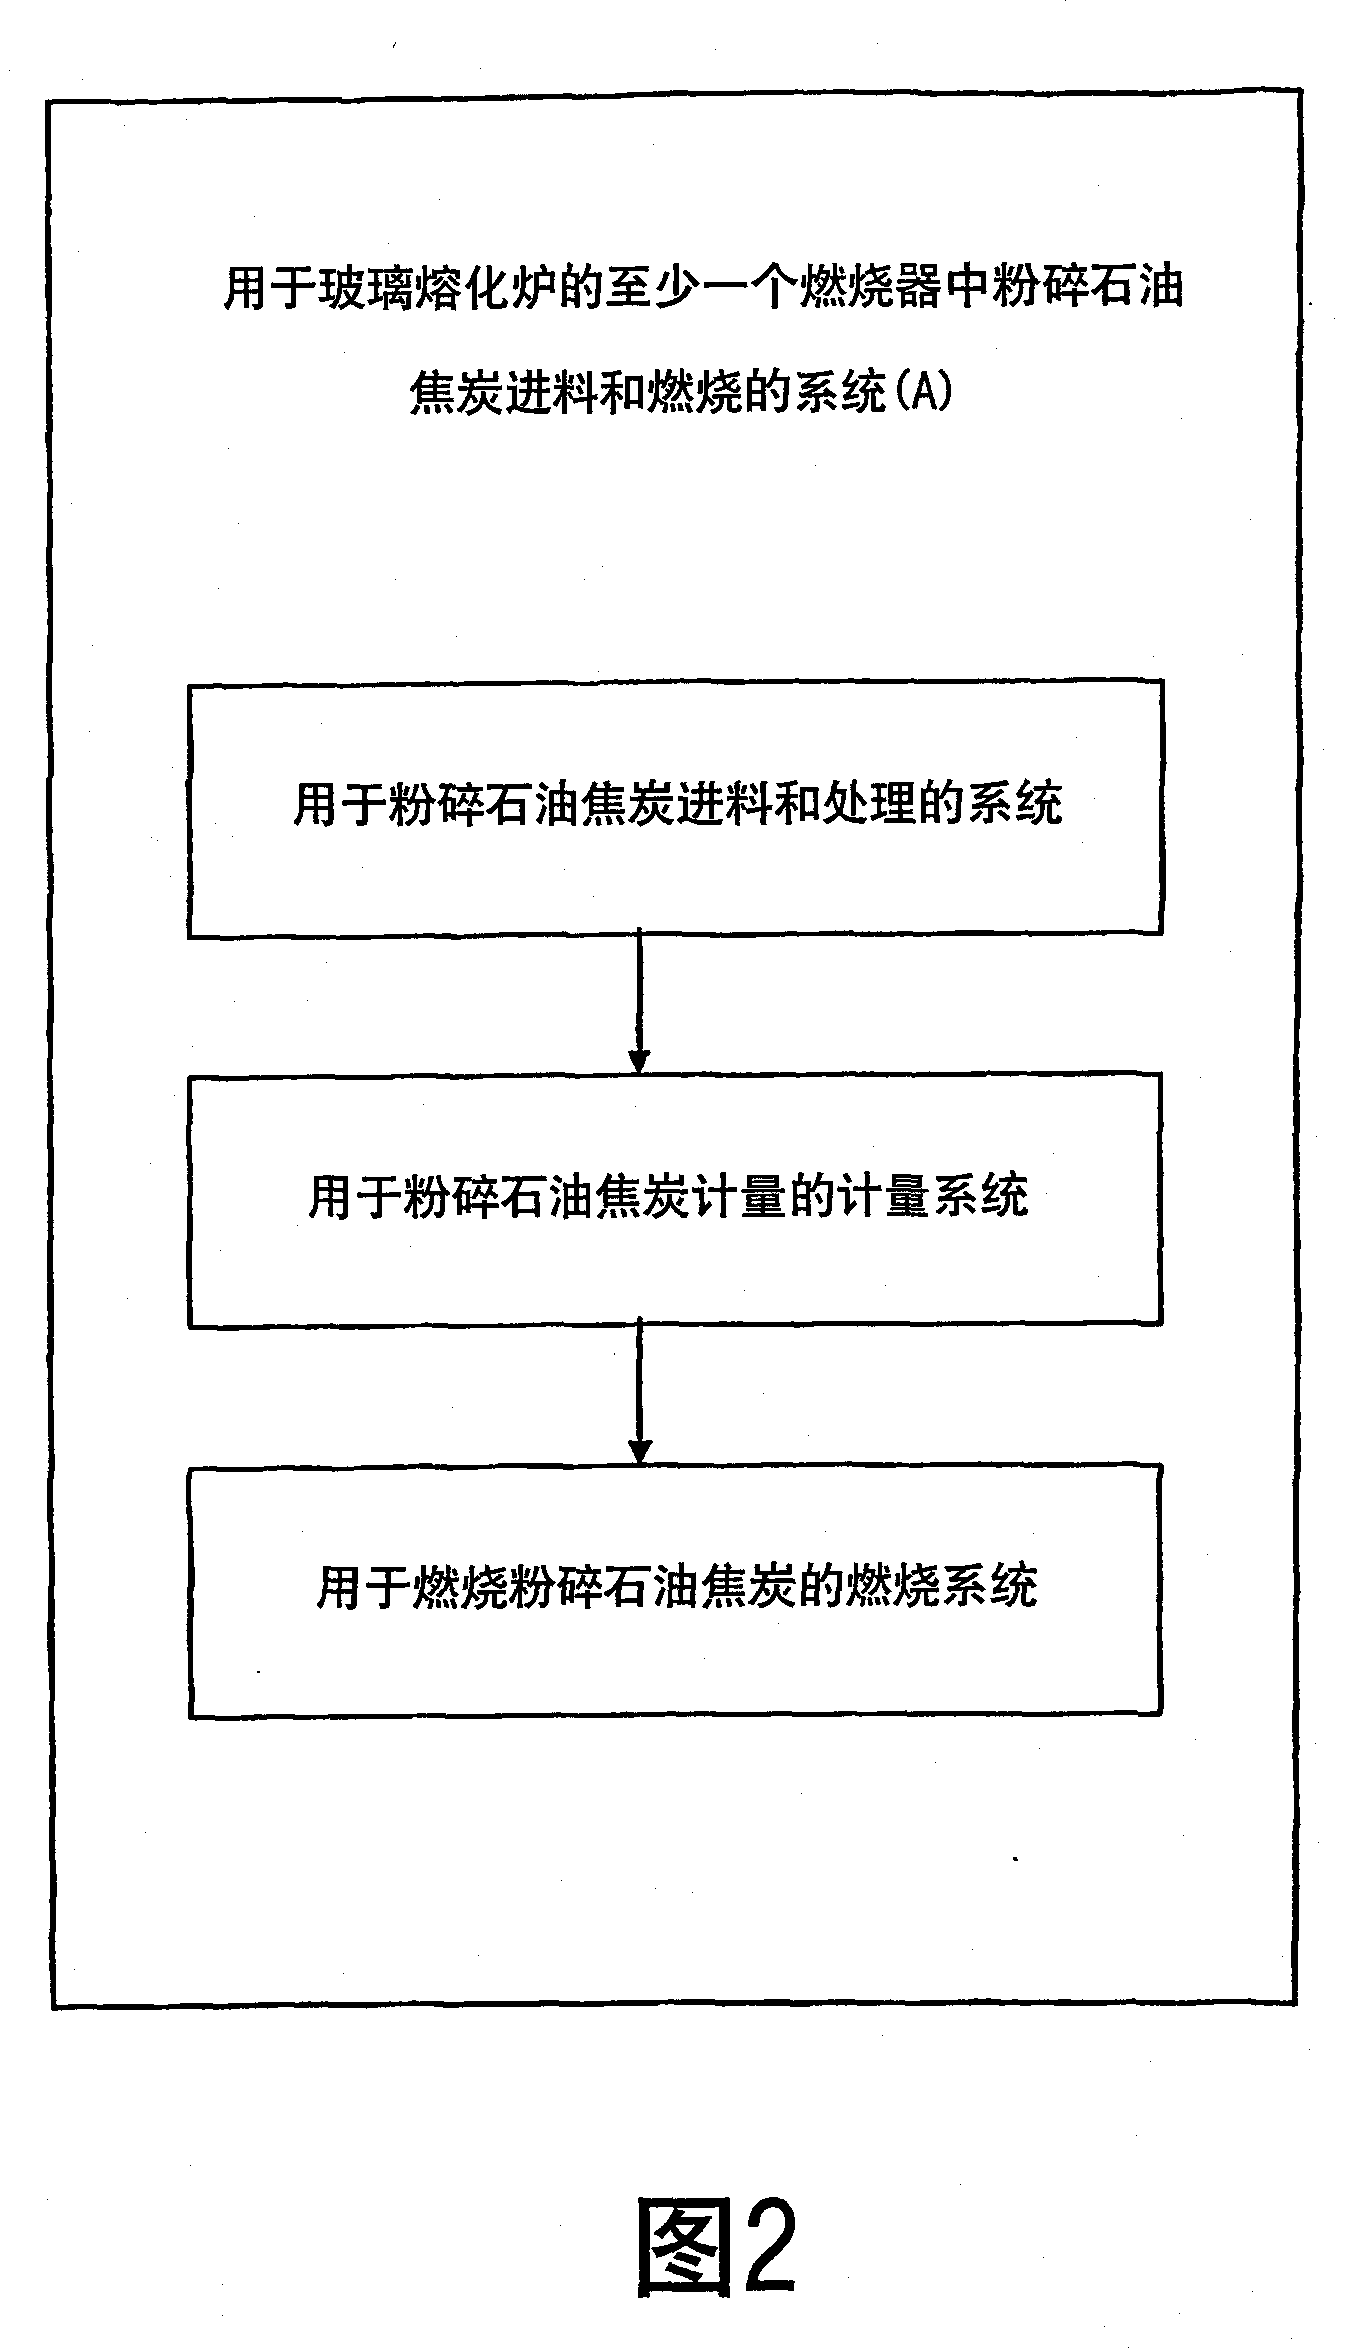 Method and system for feeding and burning a pulverized fuel in a glass melting furnace, and burner for use in the same